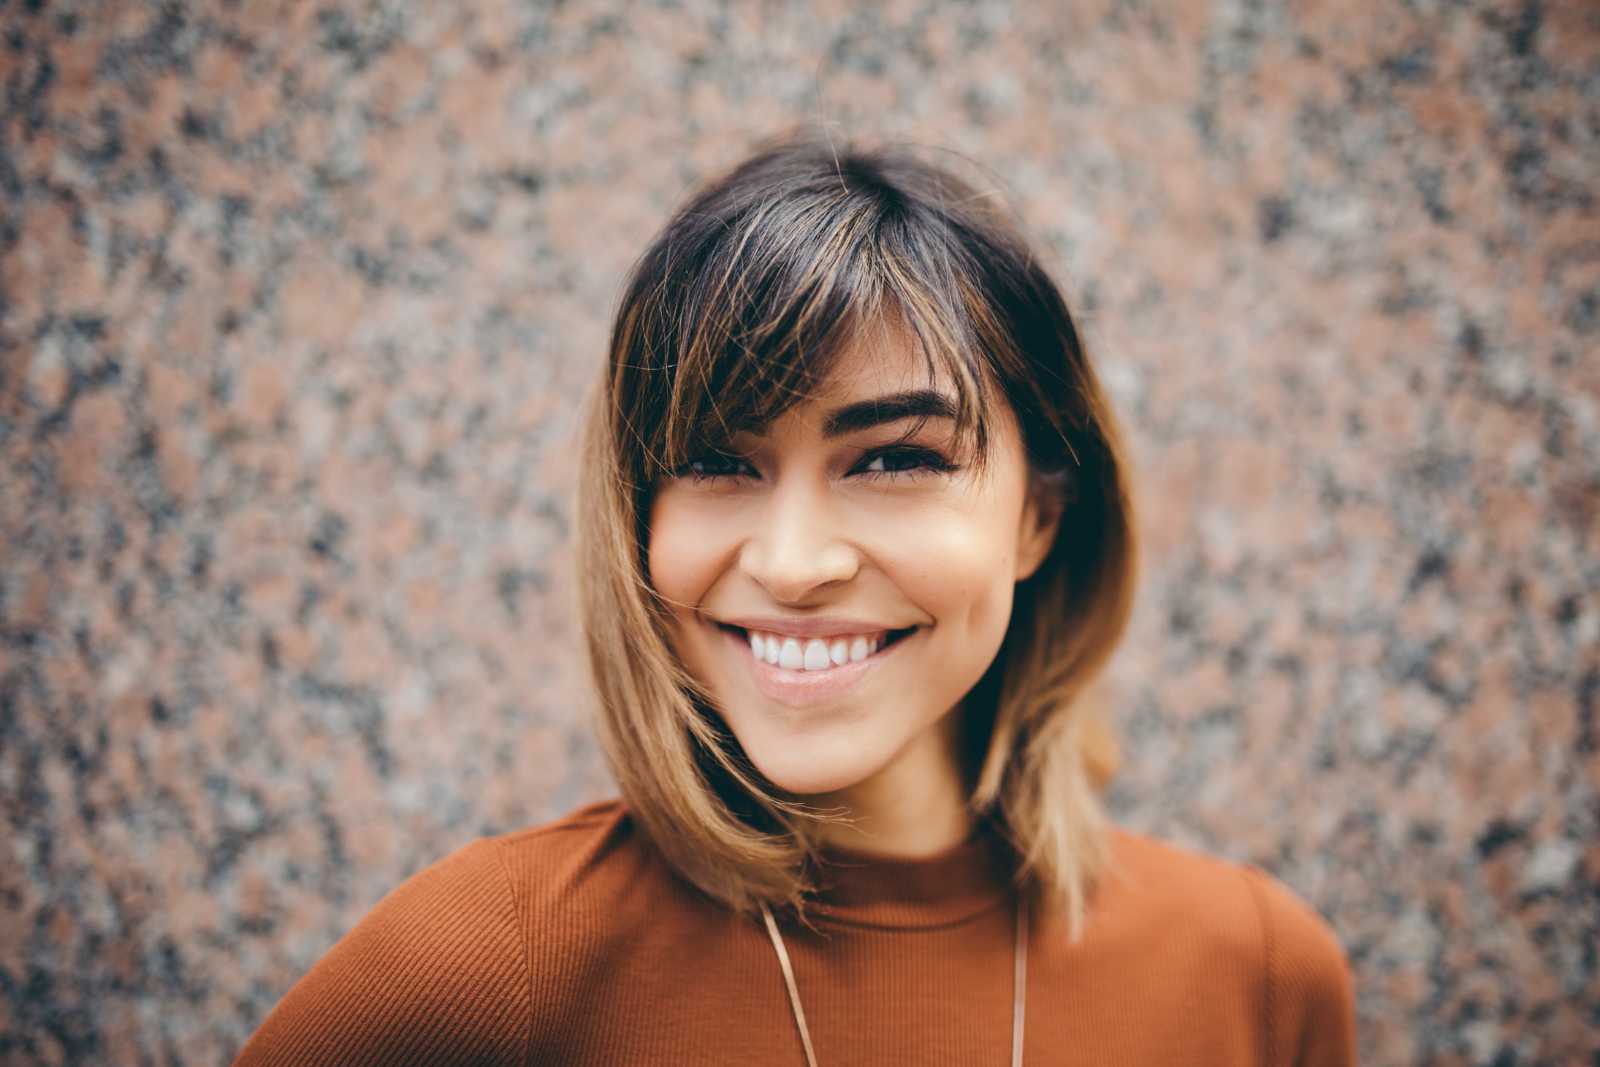 Testimonials Young woman wearing a brown sweater smiling, with orange and black pattern behind her